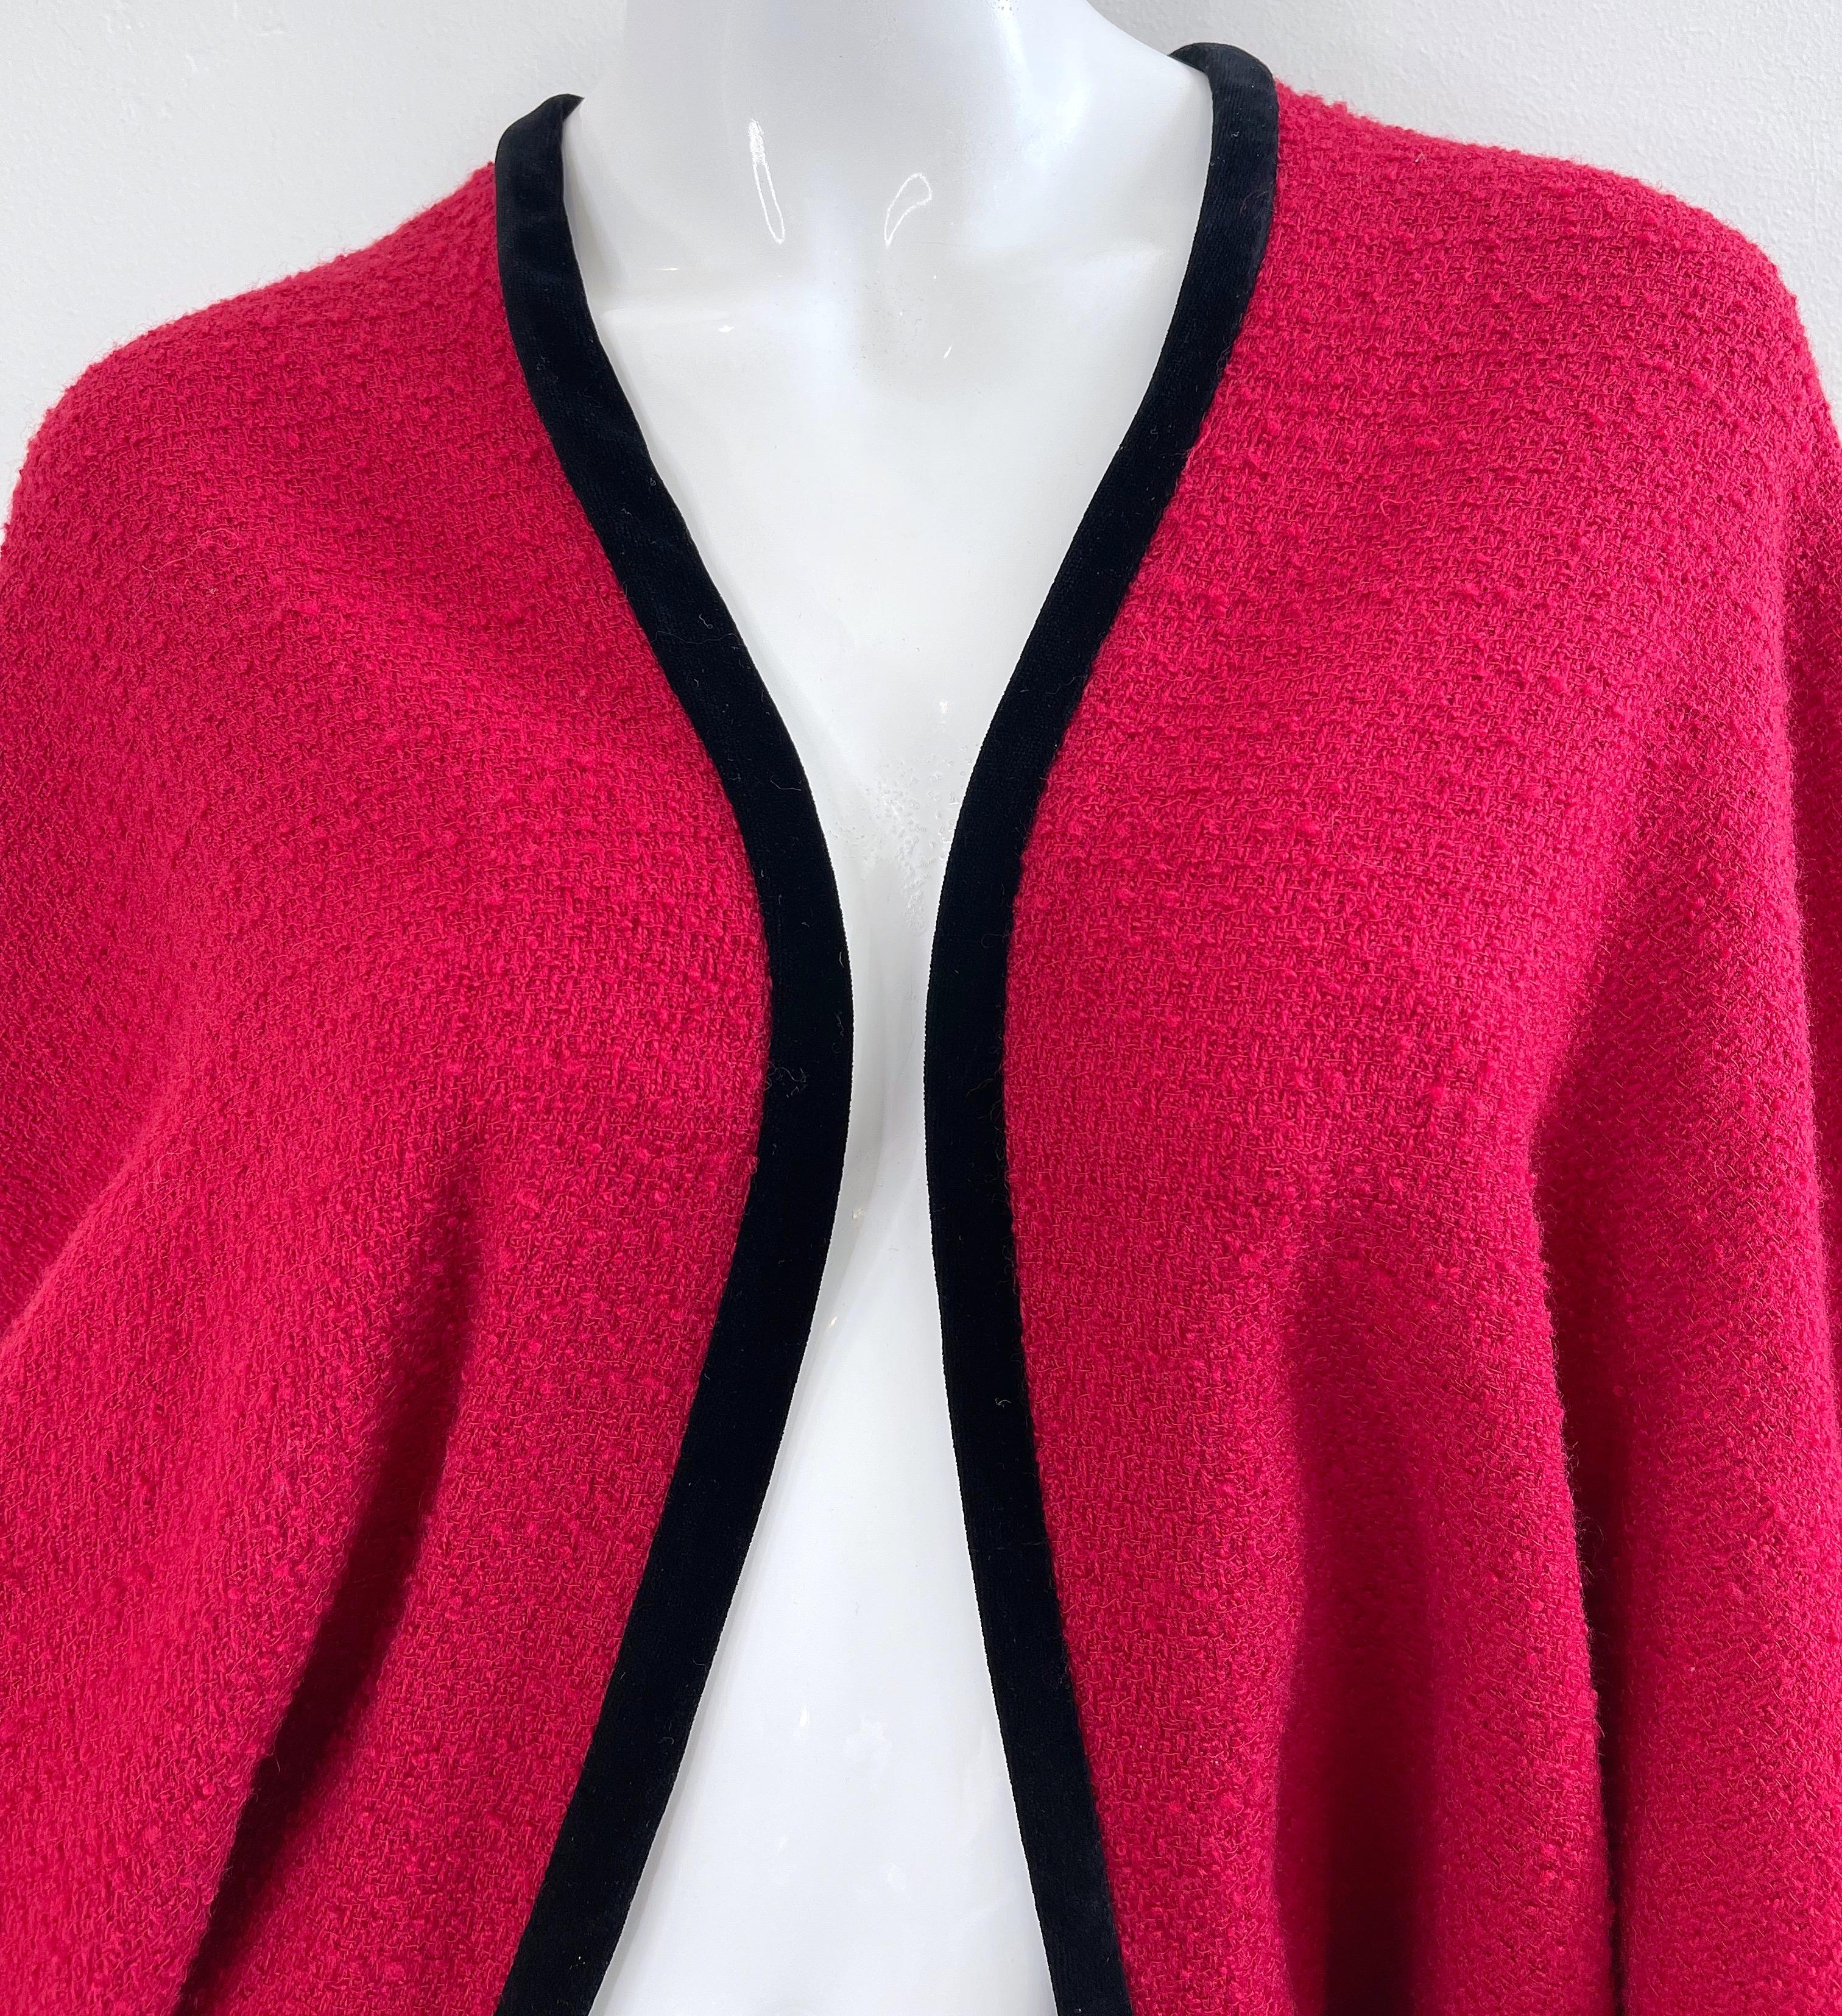 Karl Lagerfeld 1980s Lipstick Red Boiled Wool Cocoon Vintage Cape Kimono Jacket In Excellent Condition For Sale In San Diego, CA